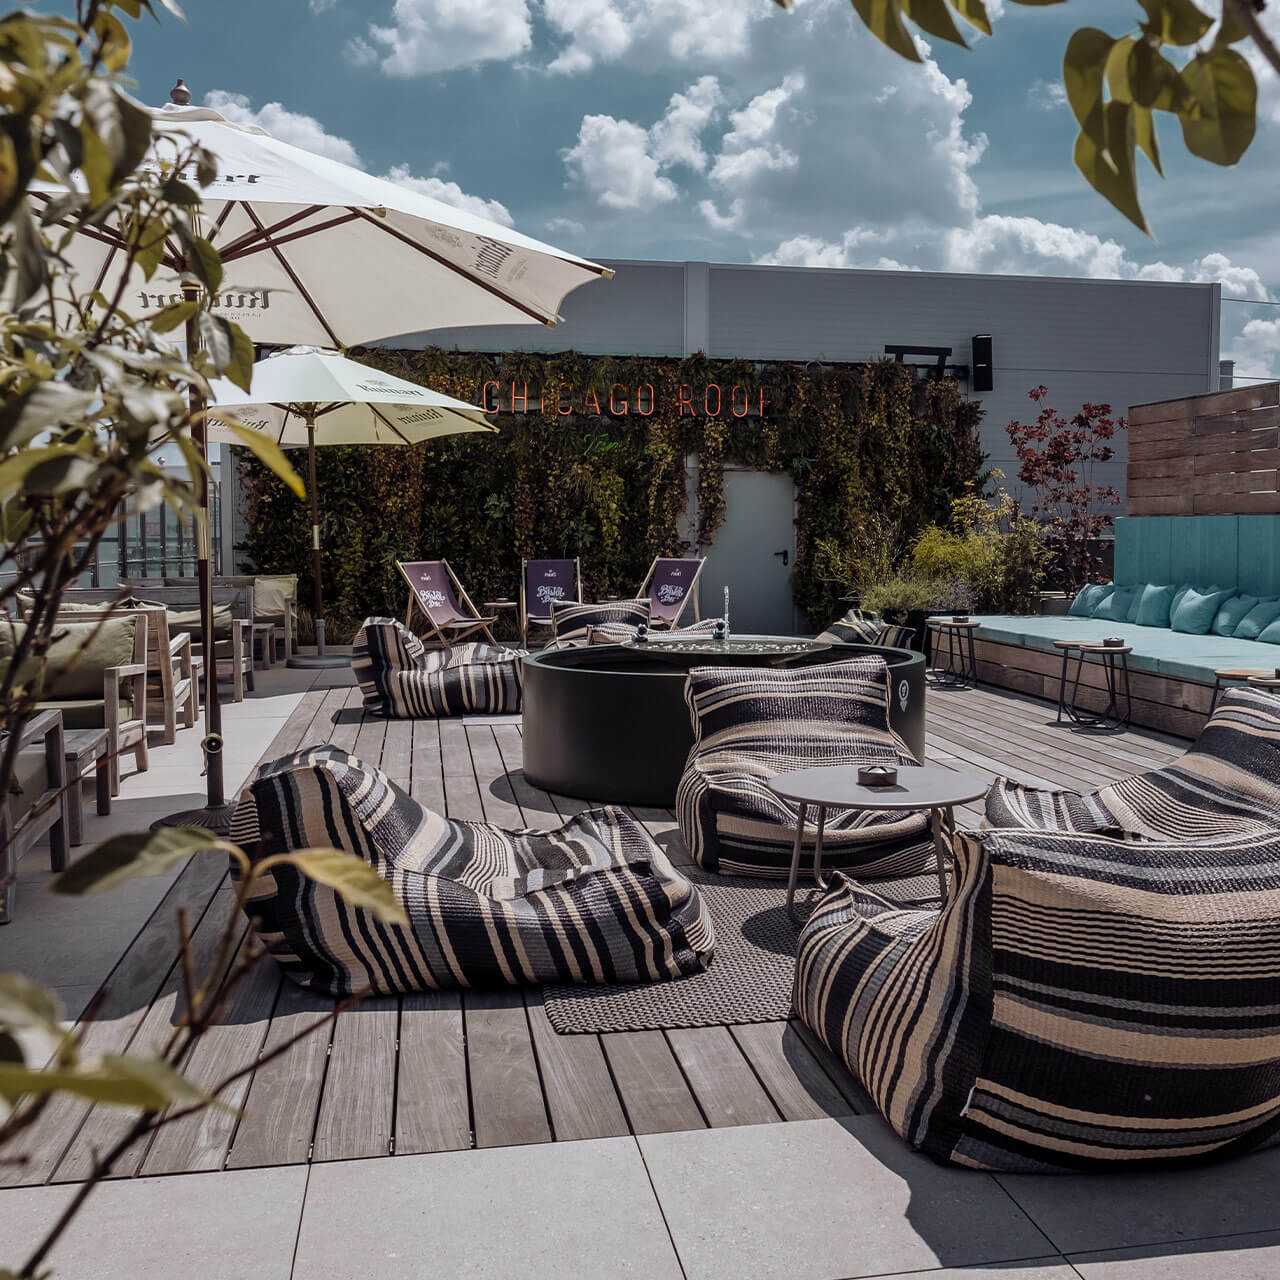 Chicago Rooftop: relax on big beanbags or armchairs with cool drinks